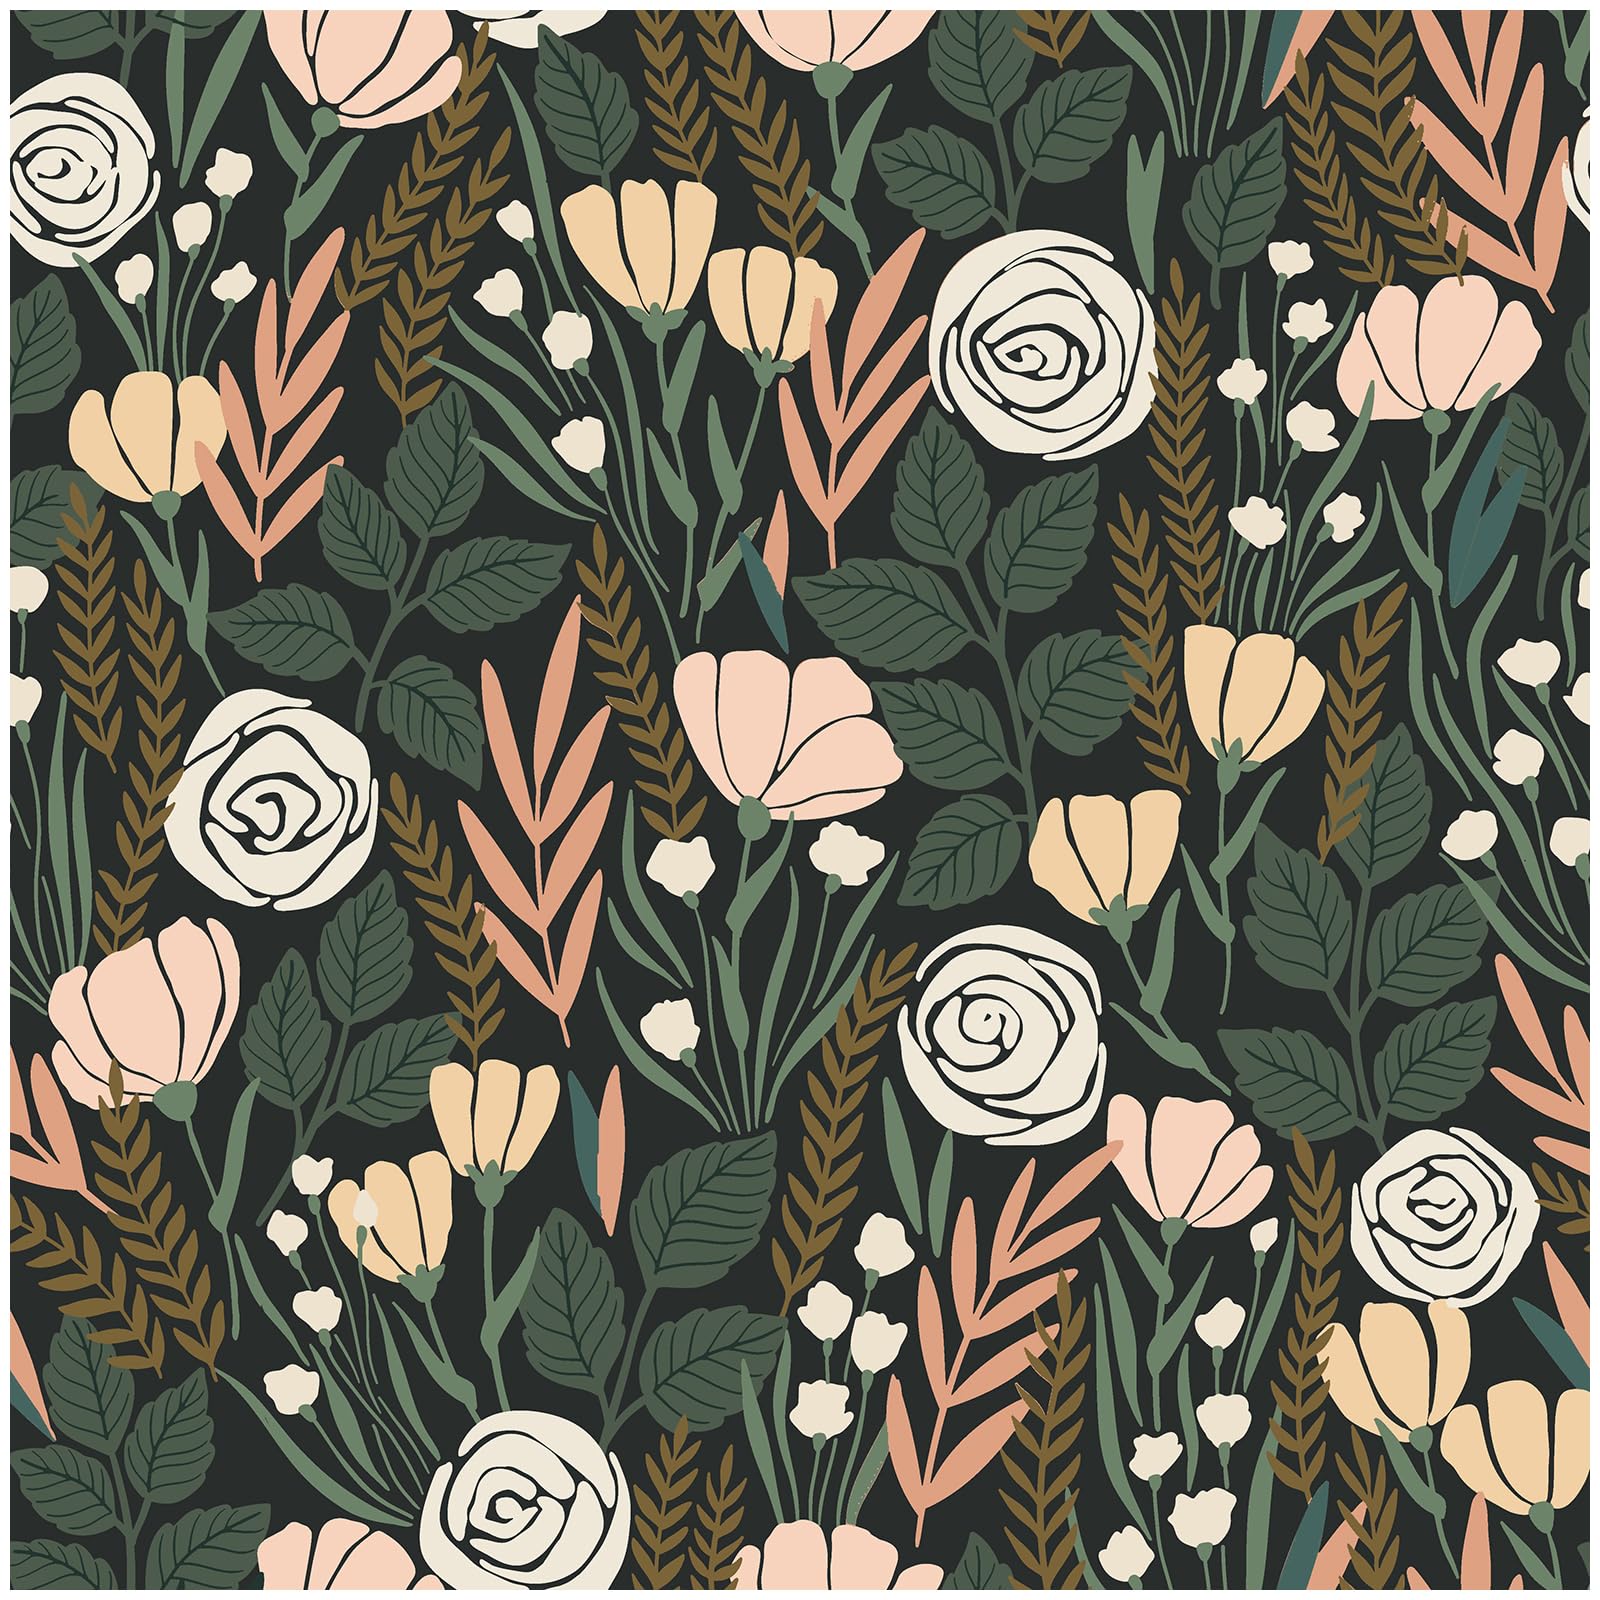 HAOKHOME 93386-5 Peel and Stick Wallpaper Floral Removable Stick on Contact Paper for Bathroom Green/Beige/Black 17.7in x 9.8ft